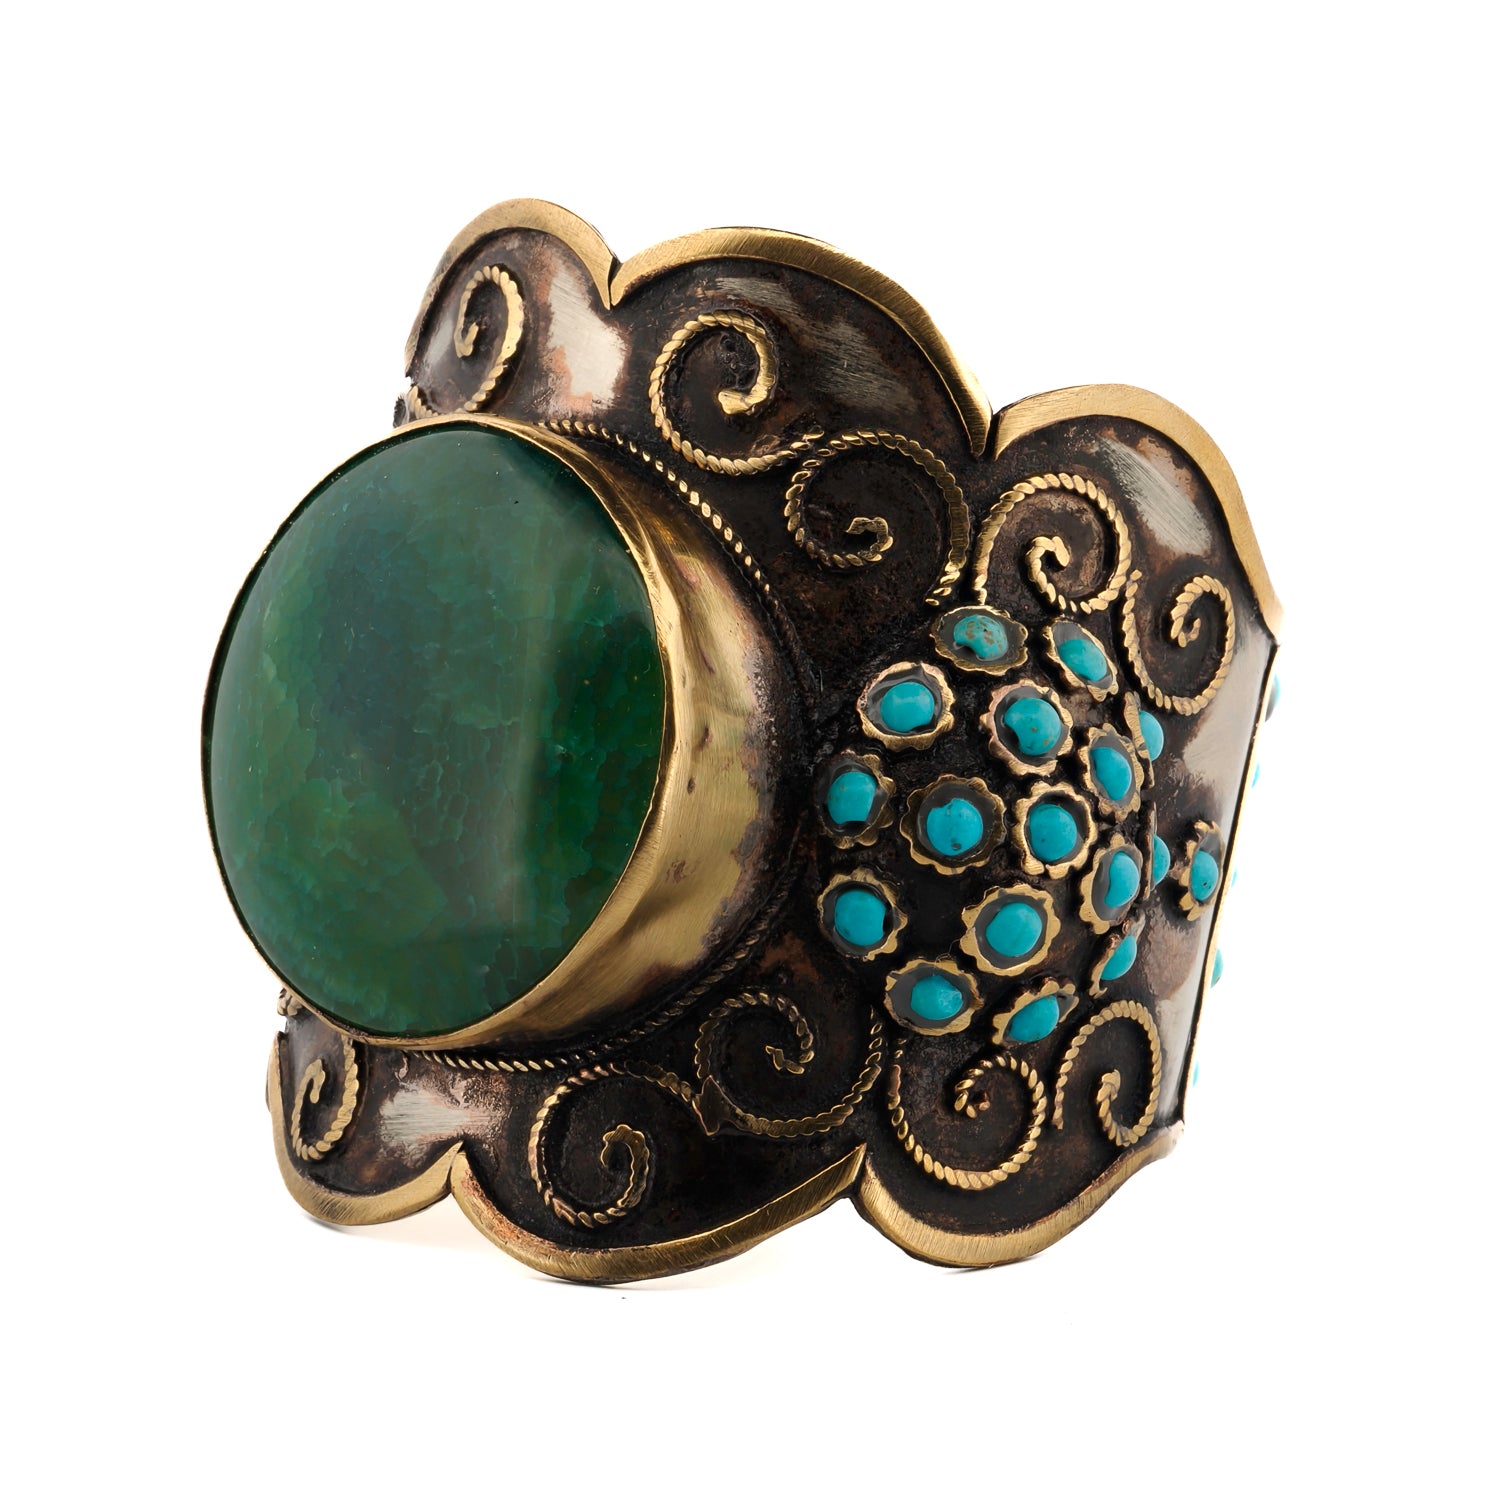 Gold-plated geometric designs with turquoise and jade gemstones